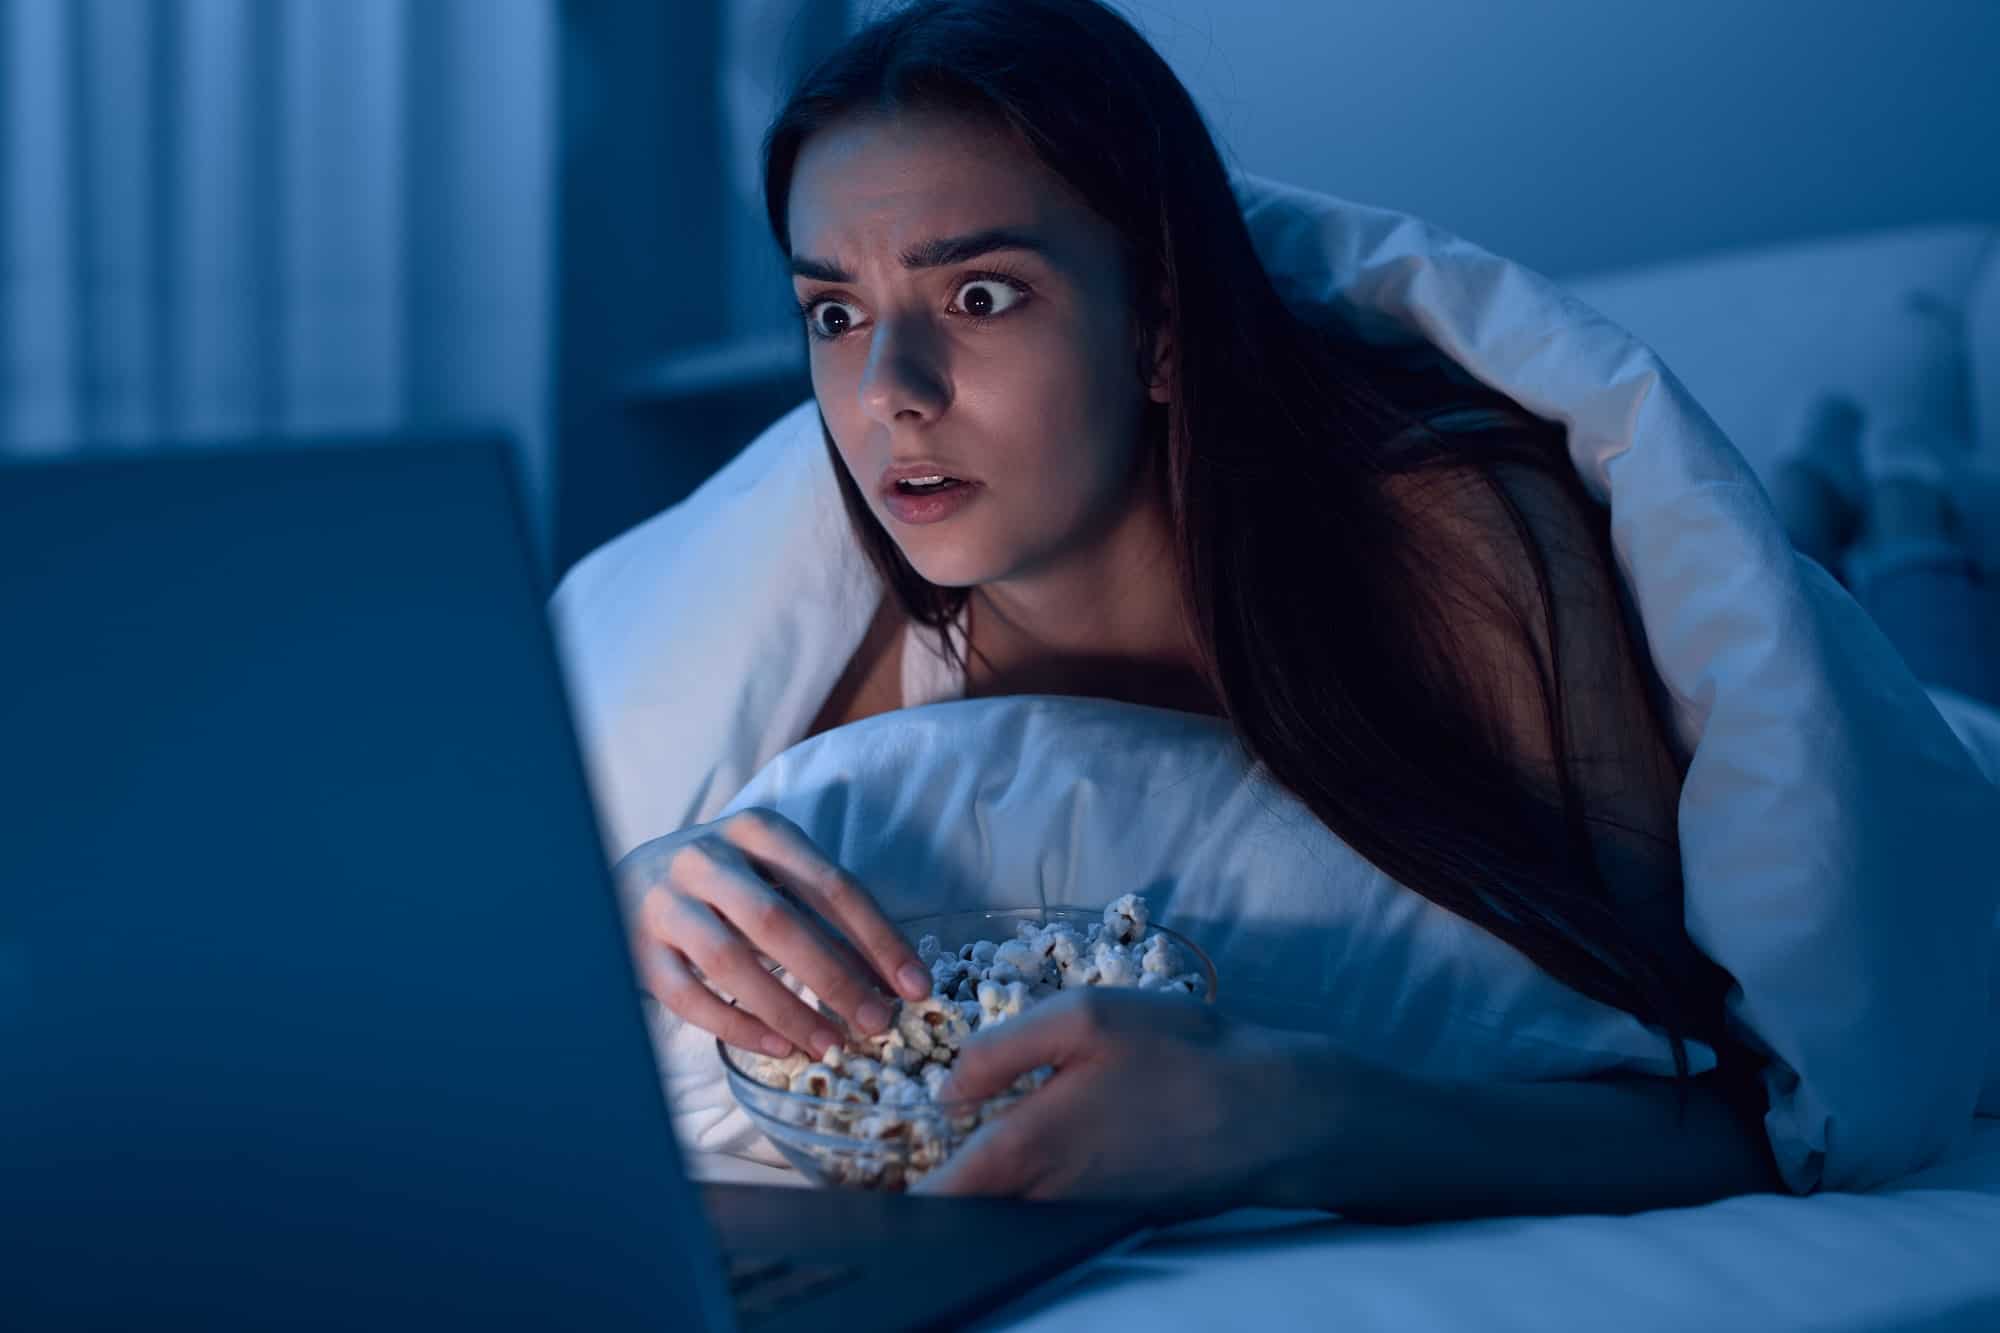 Woman watching movie and eating popcorn at night